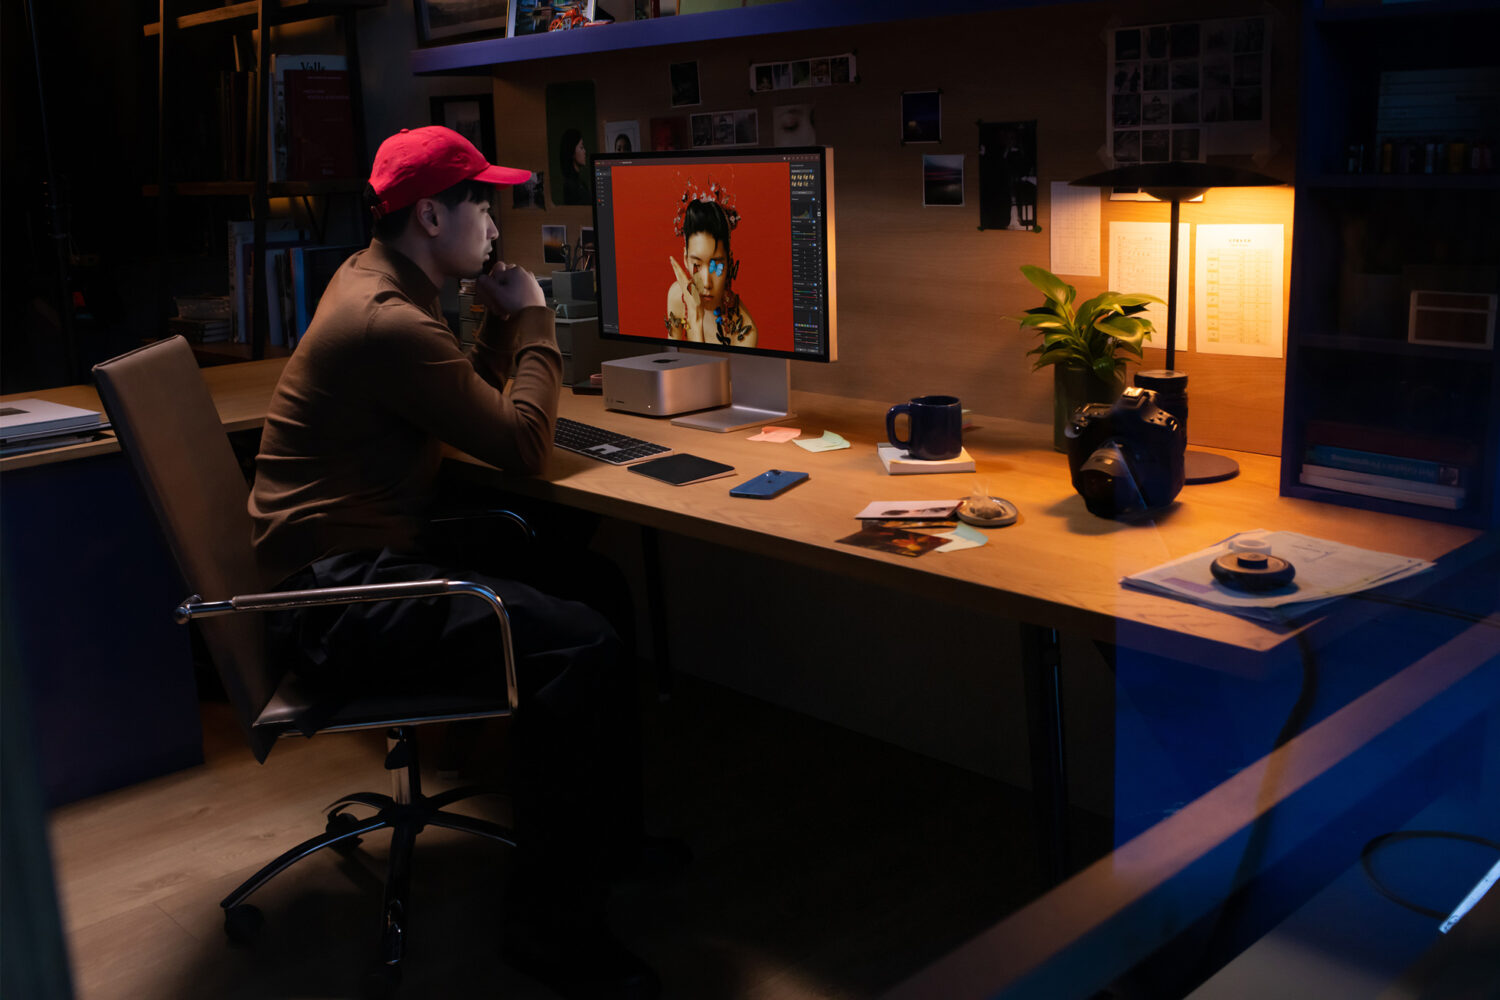 Apple's marketing image showing a creative professional sitting at their desk and using a Mac Studio computer connected to a Studio Display